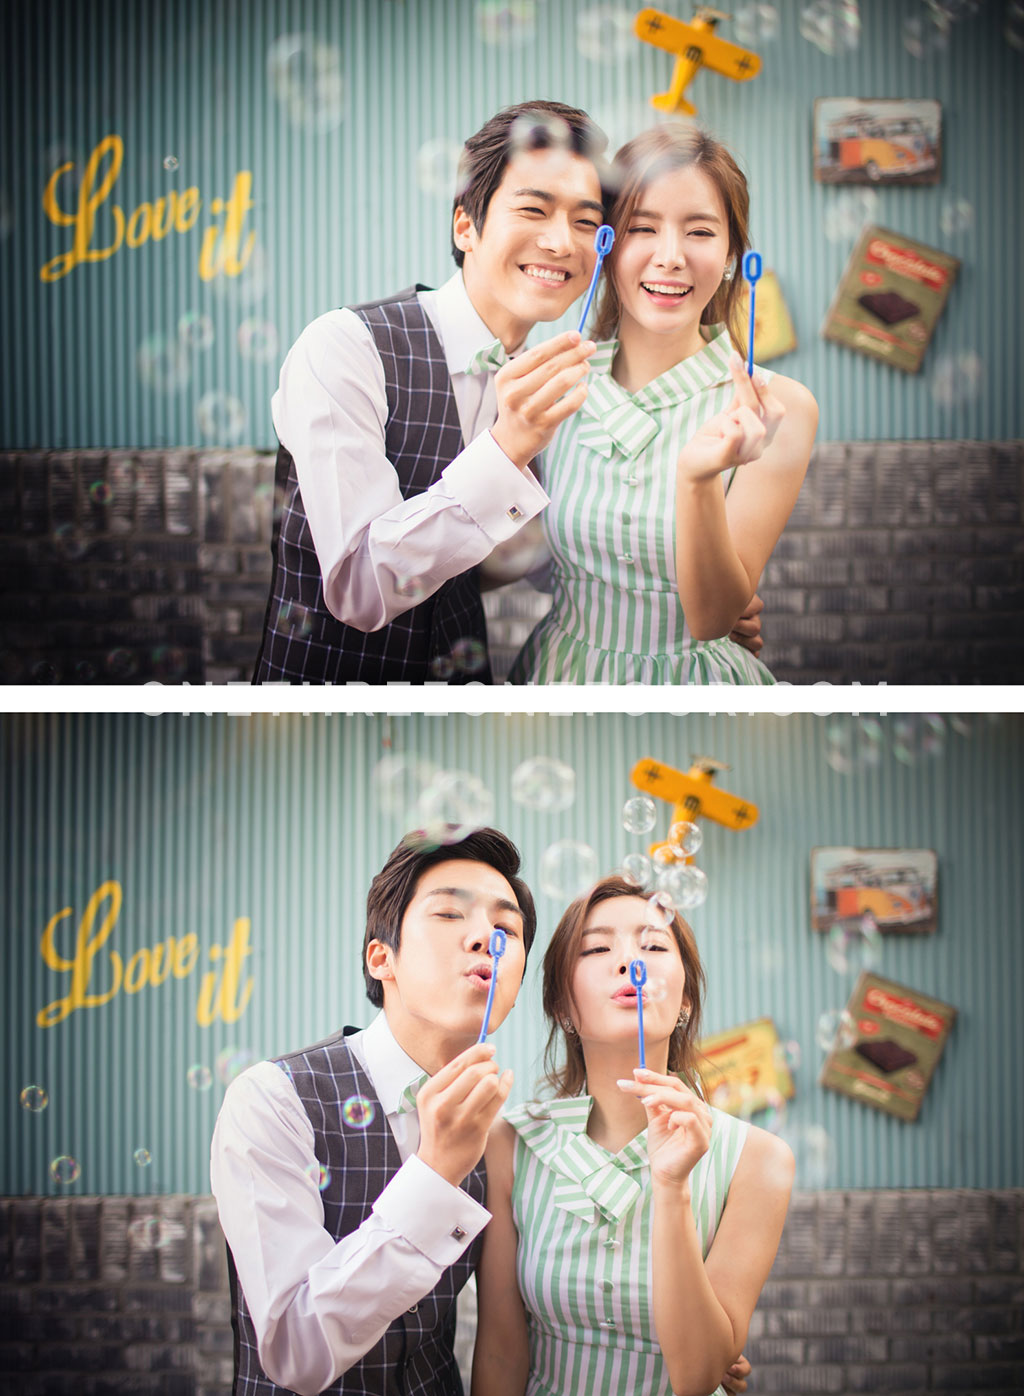 2016 Pre-wedding Photography Sample Part 1 - Small Wedding Concept by Spazio Studio on OneThreeOneFour 12